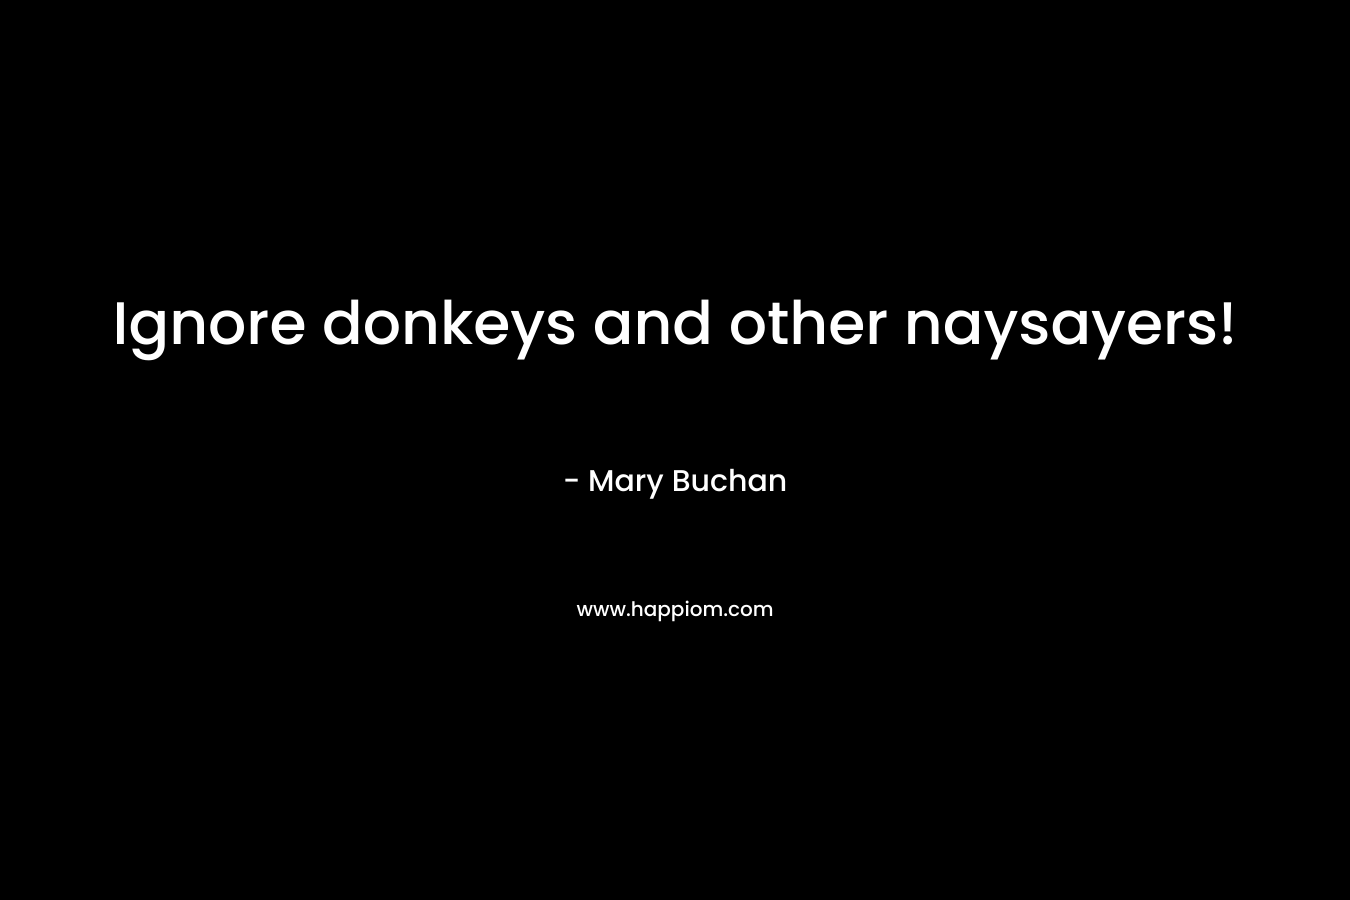 Ignore donkeys and other naysayers! – Mary Buchan